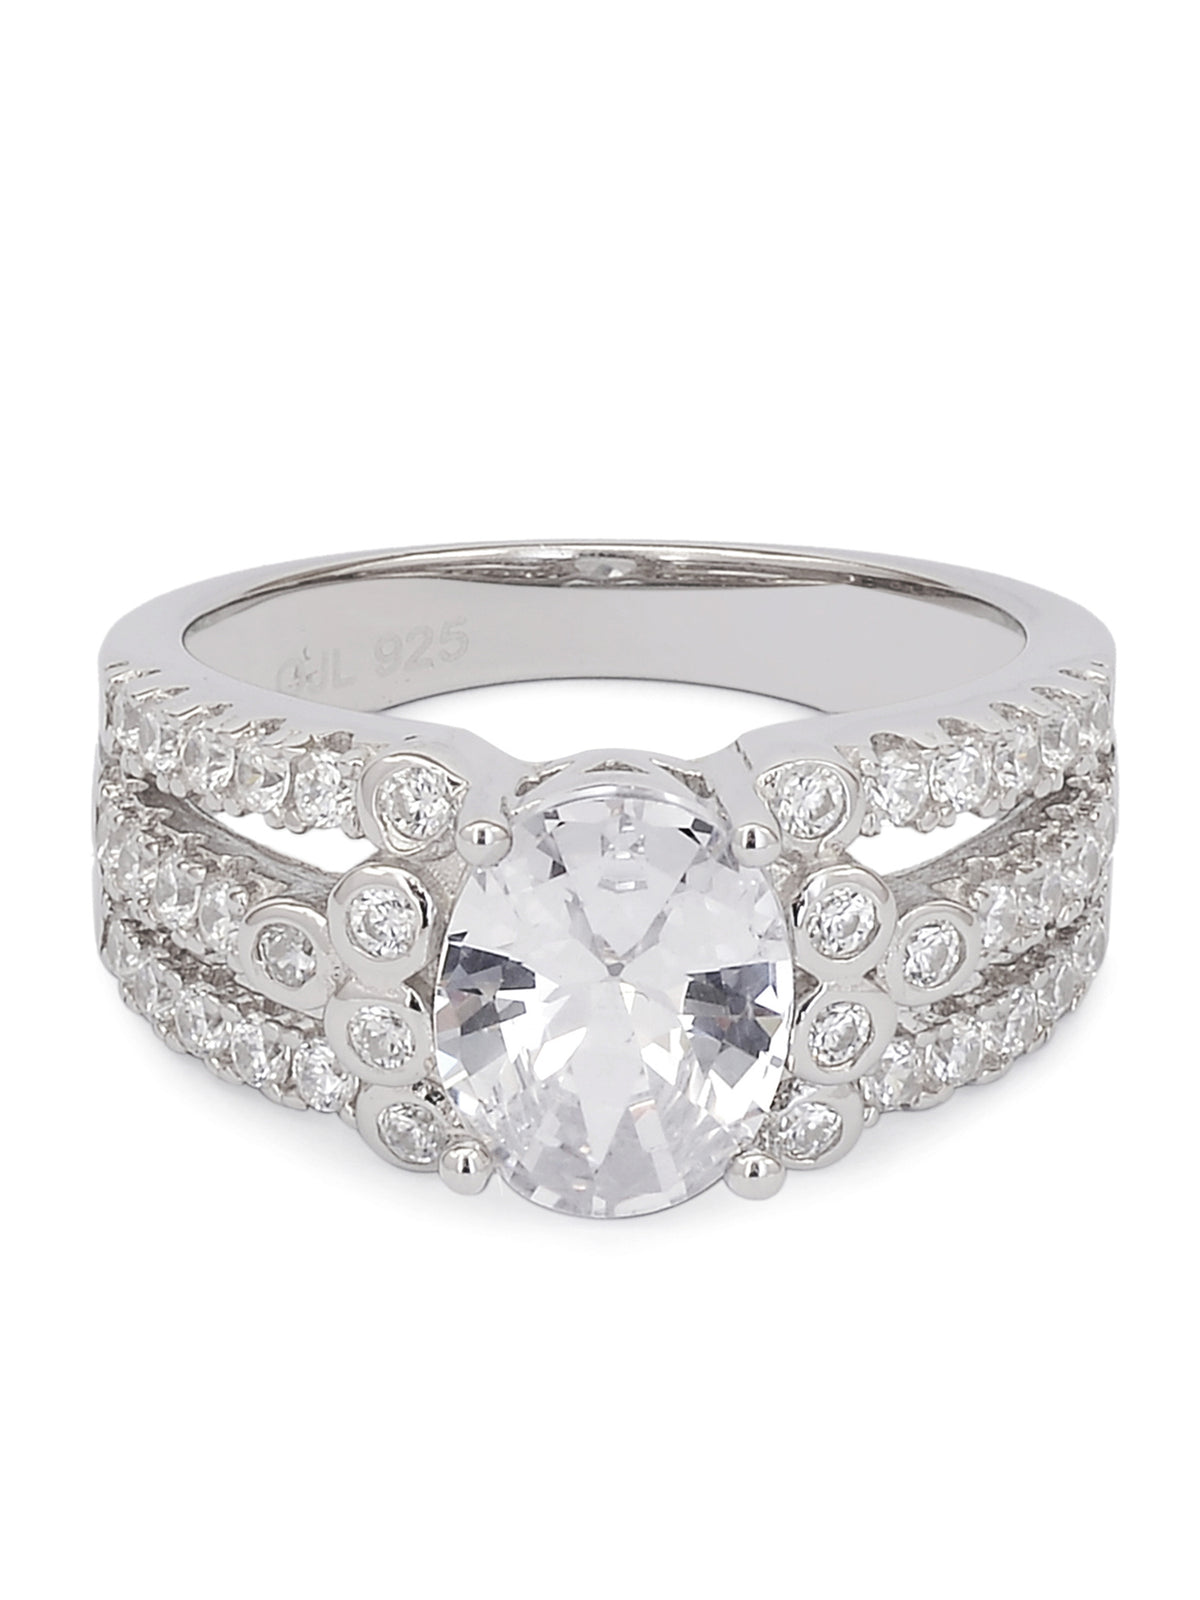 2.5 CARAT OVAL SOLITAIRE SILVER RING